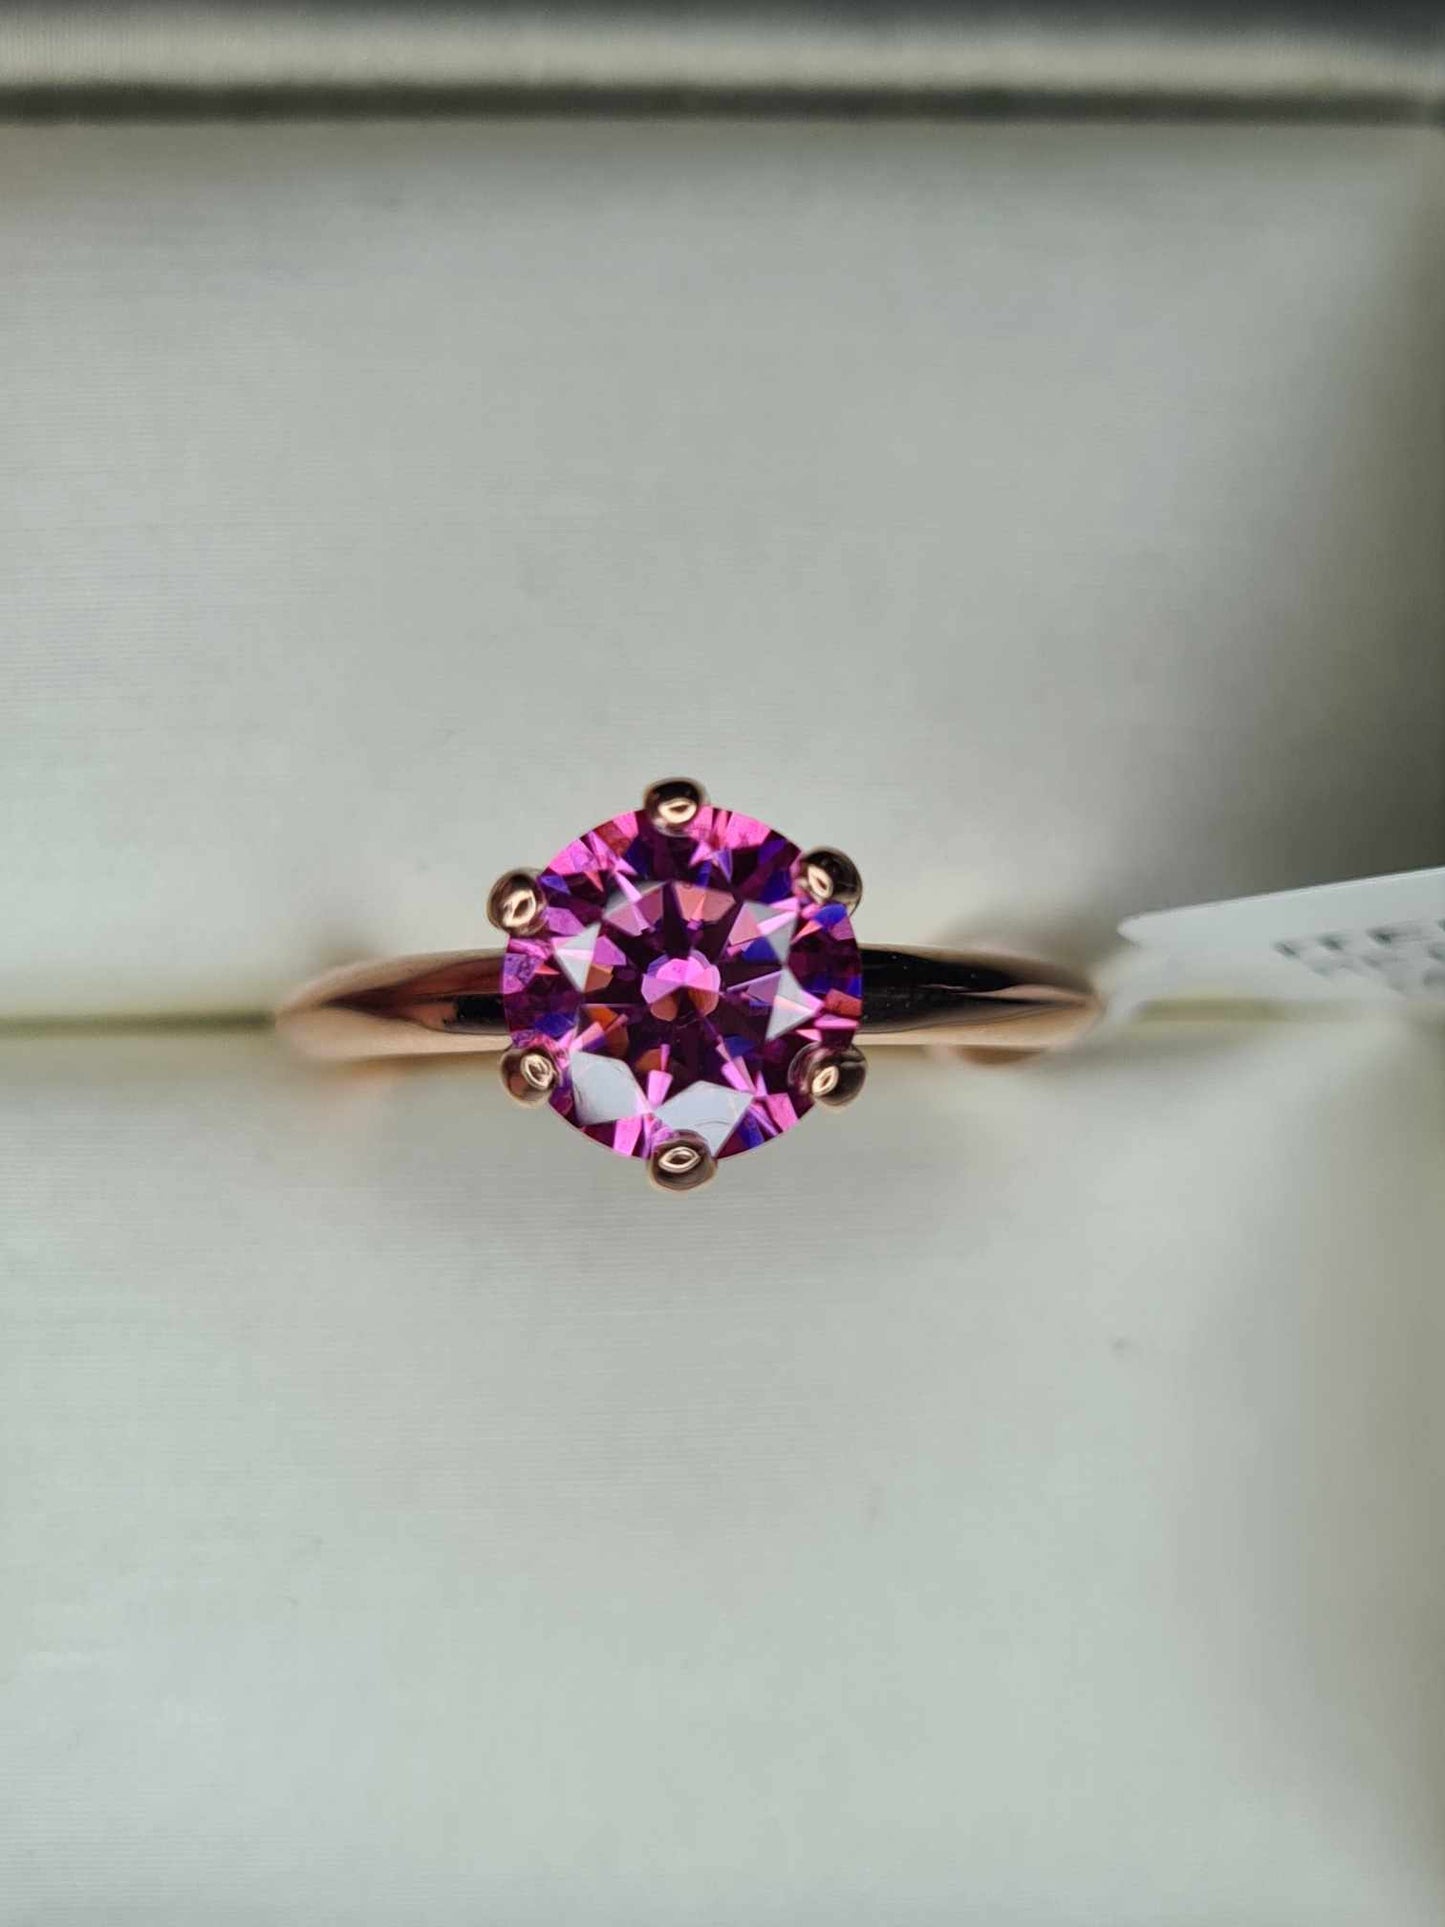 1.50 Ct. Pink Moissanite Solitaire Ring in 18K Rose Gold 925 sterling silver SIZE M